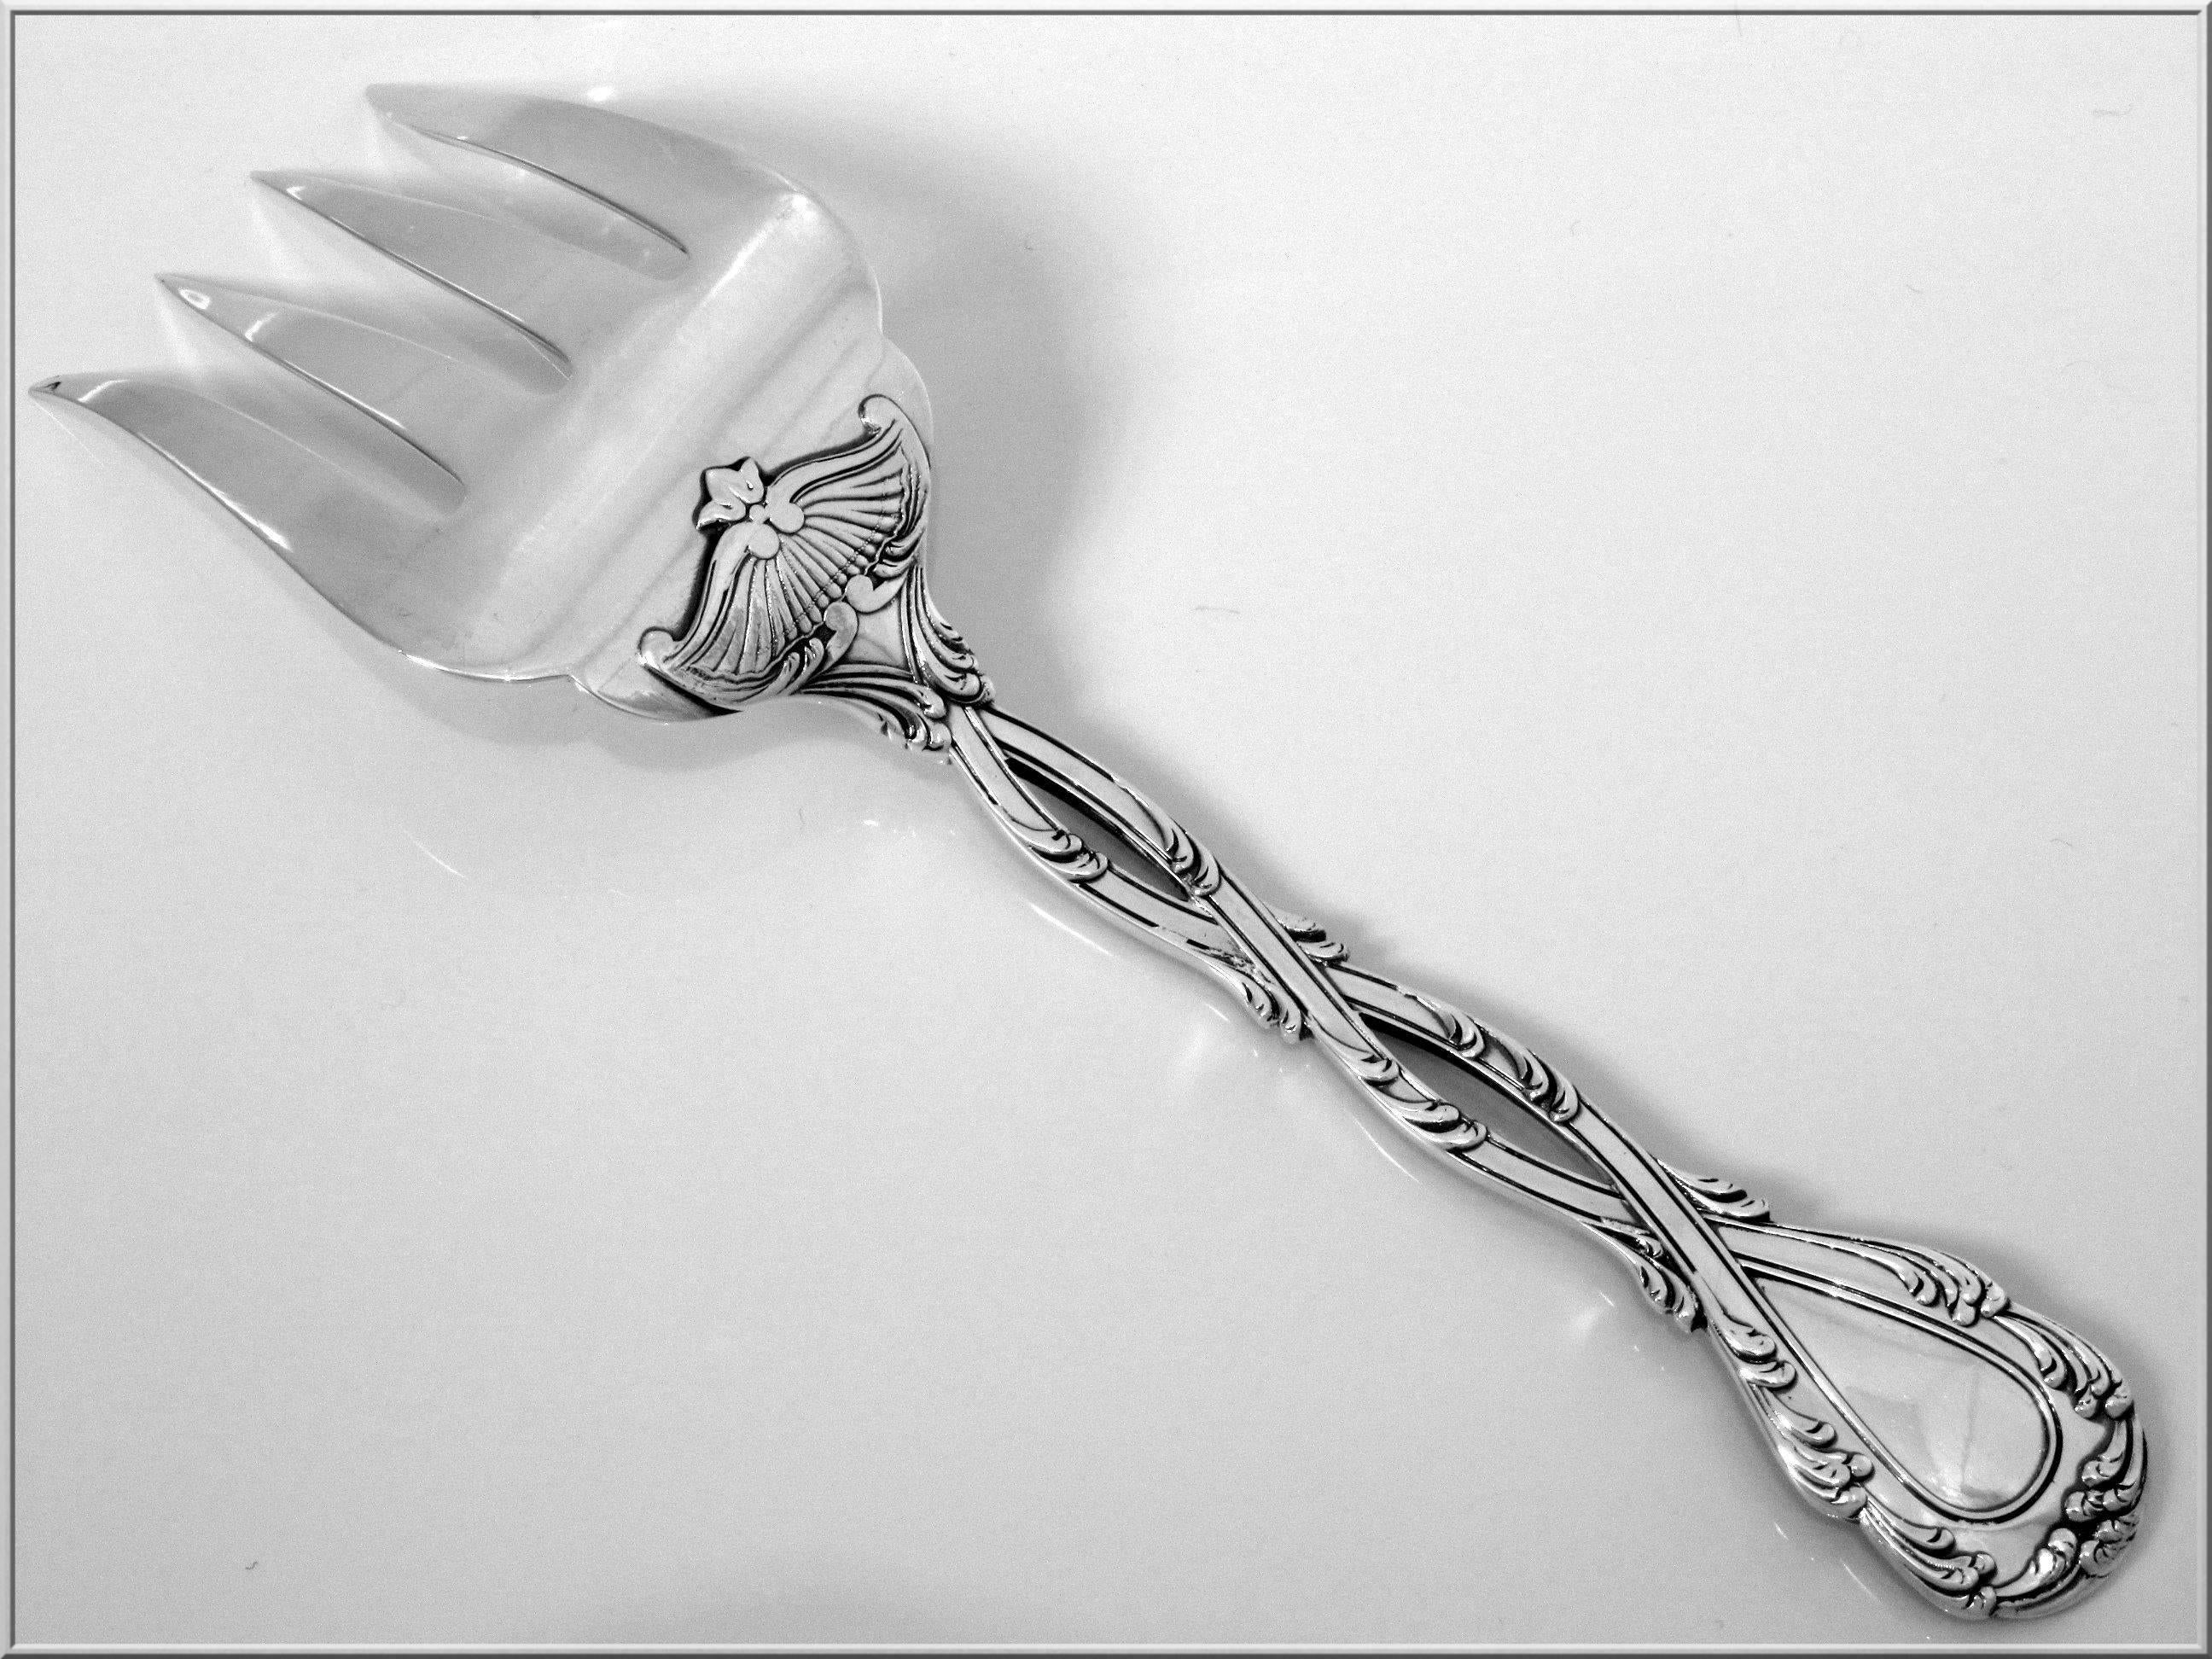 Odiot Tetard French All Sterling Silver Fish Servers 2 pc Trianon pattern In Excellent Condition For Sale In Triaize, Pays de Loire